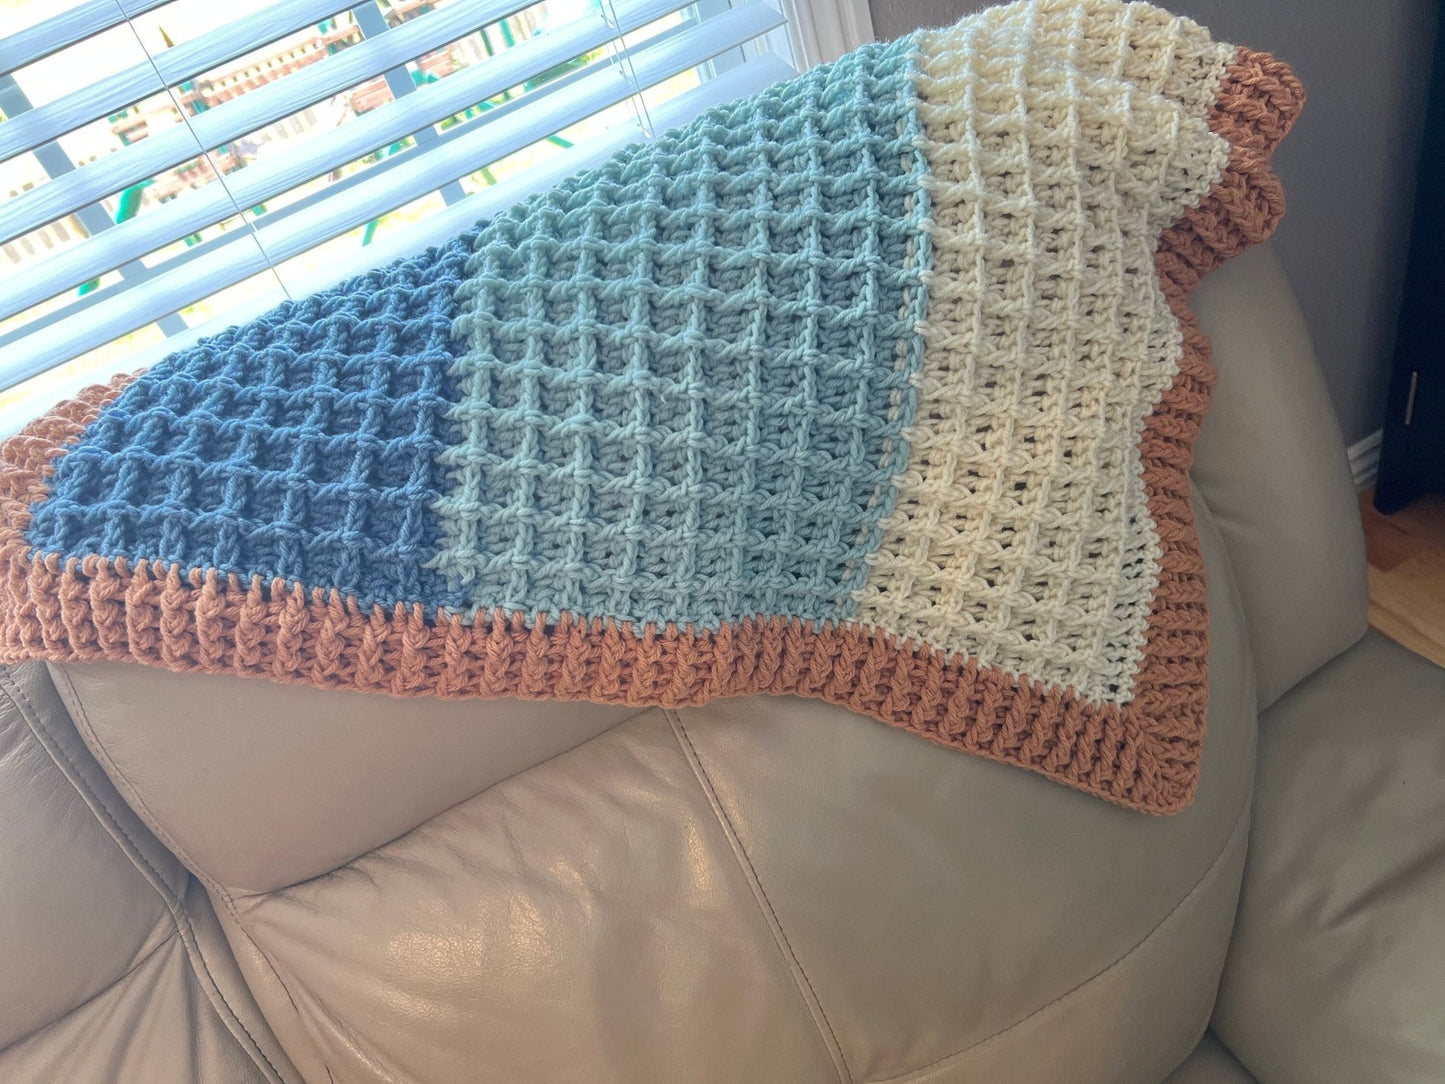 Beach vibes baby blanket in blue, white, and light brown. Modern heirloom blanket, baby shower gift 27”x23” cradle/ basinet/carseat blanket - Lilly Grace Sparkle Boutique